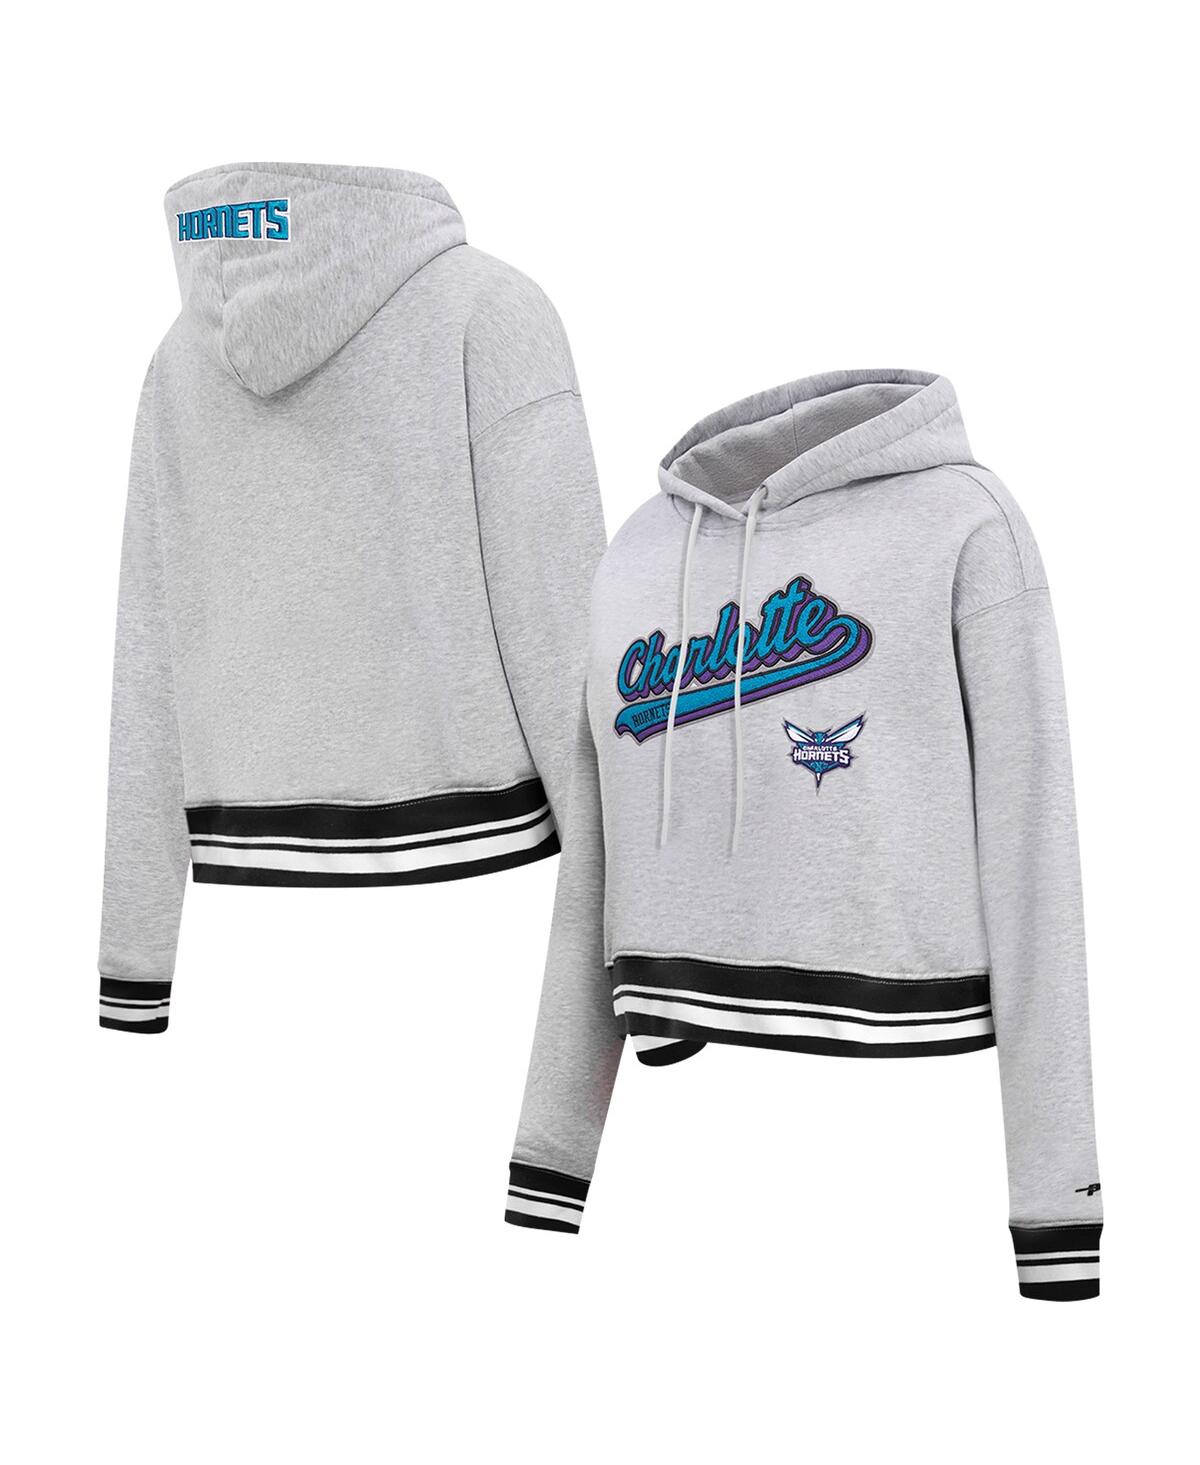 Shop Pro Standard Women's  Heather Gray Charlotte Hornets Script Tail Cropped Pullover Hoodie